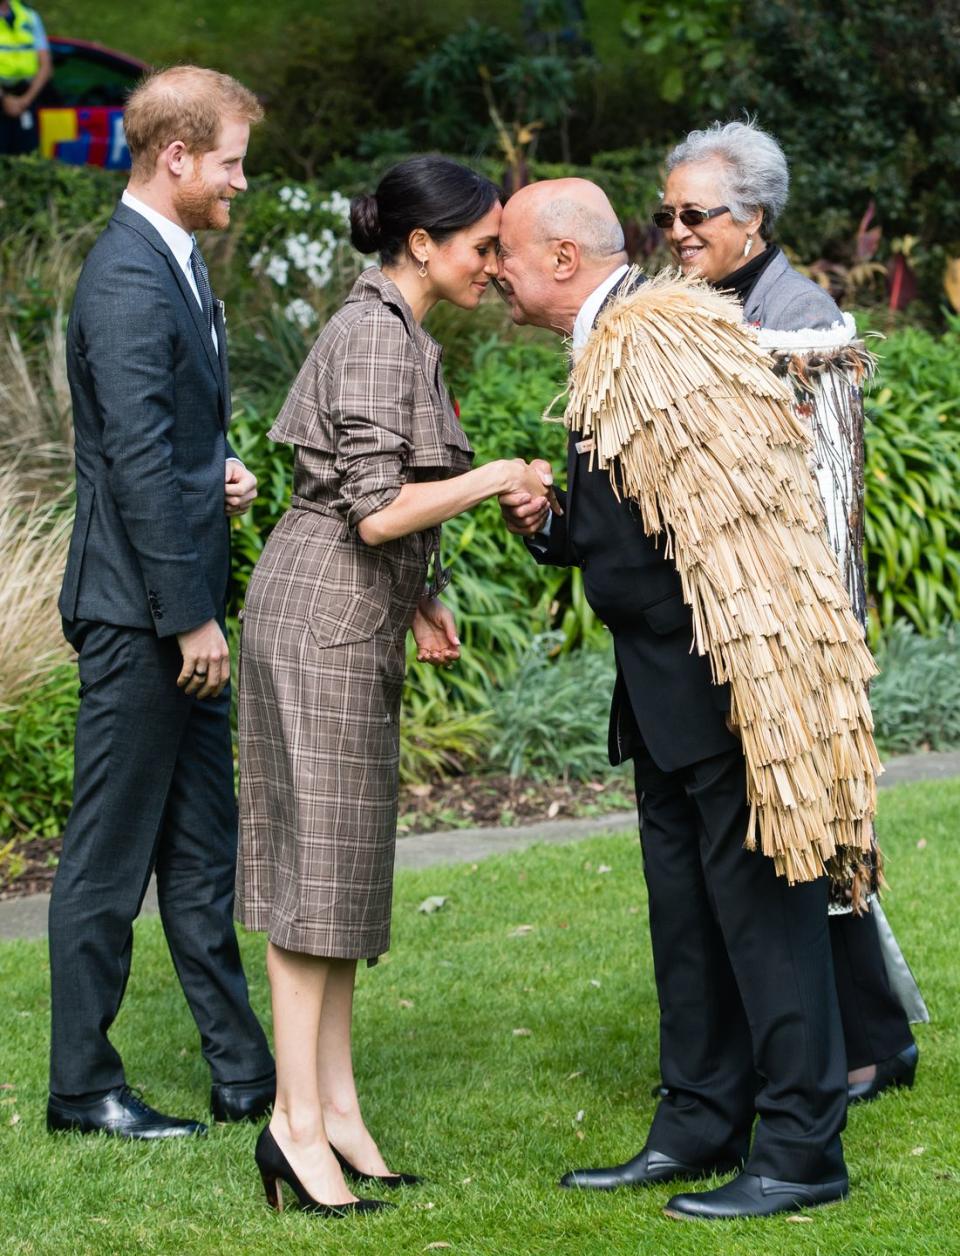 Meghans performs Hongi at the welcome ceremony.